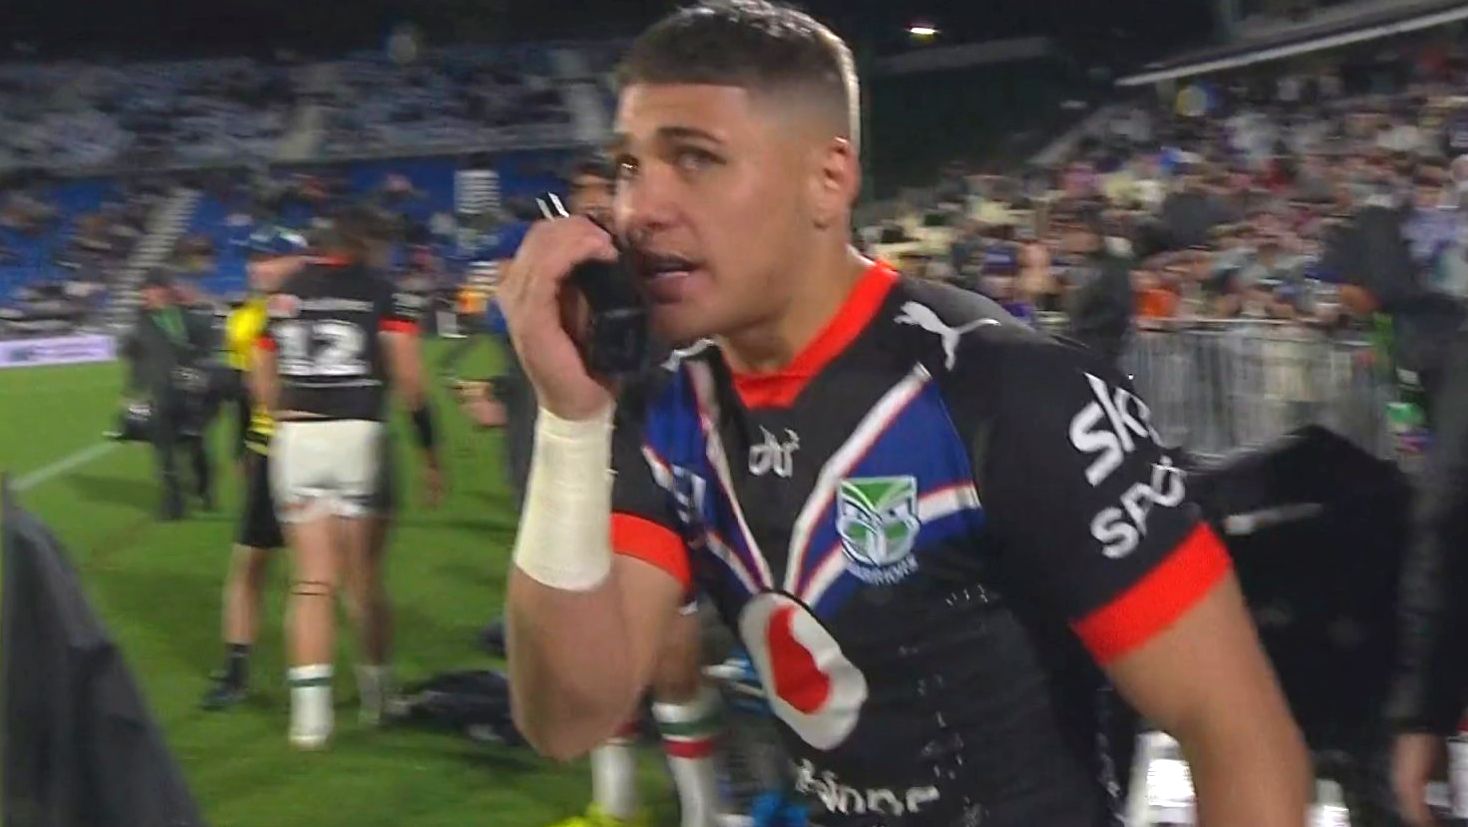 Warriors young gun Reece Walsh speaks to his coach over a walkie talkie.